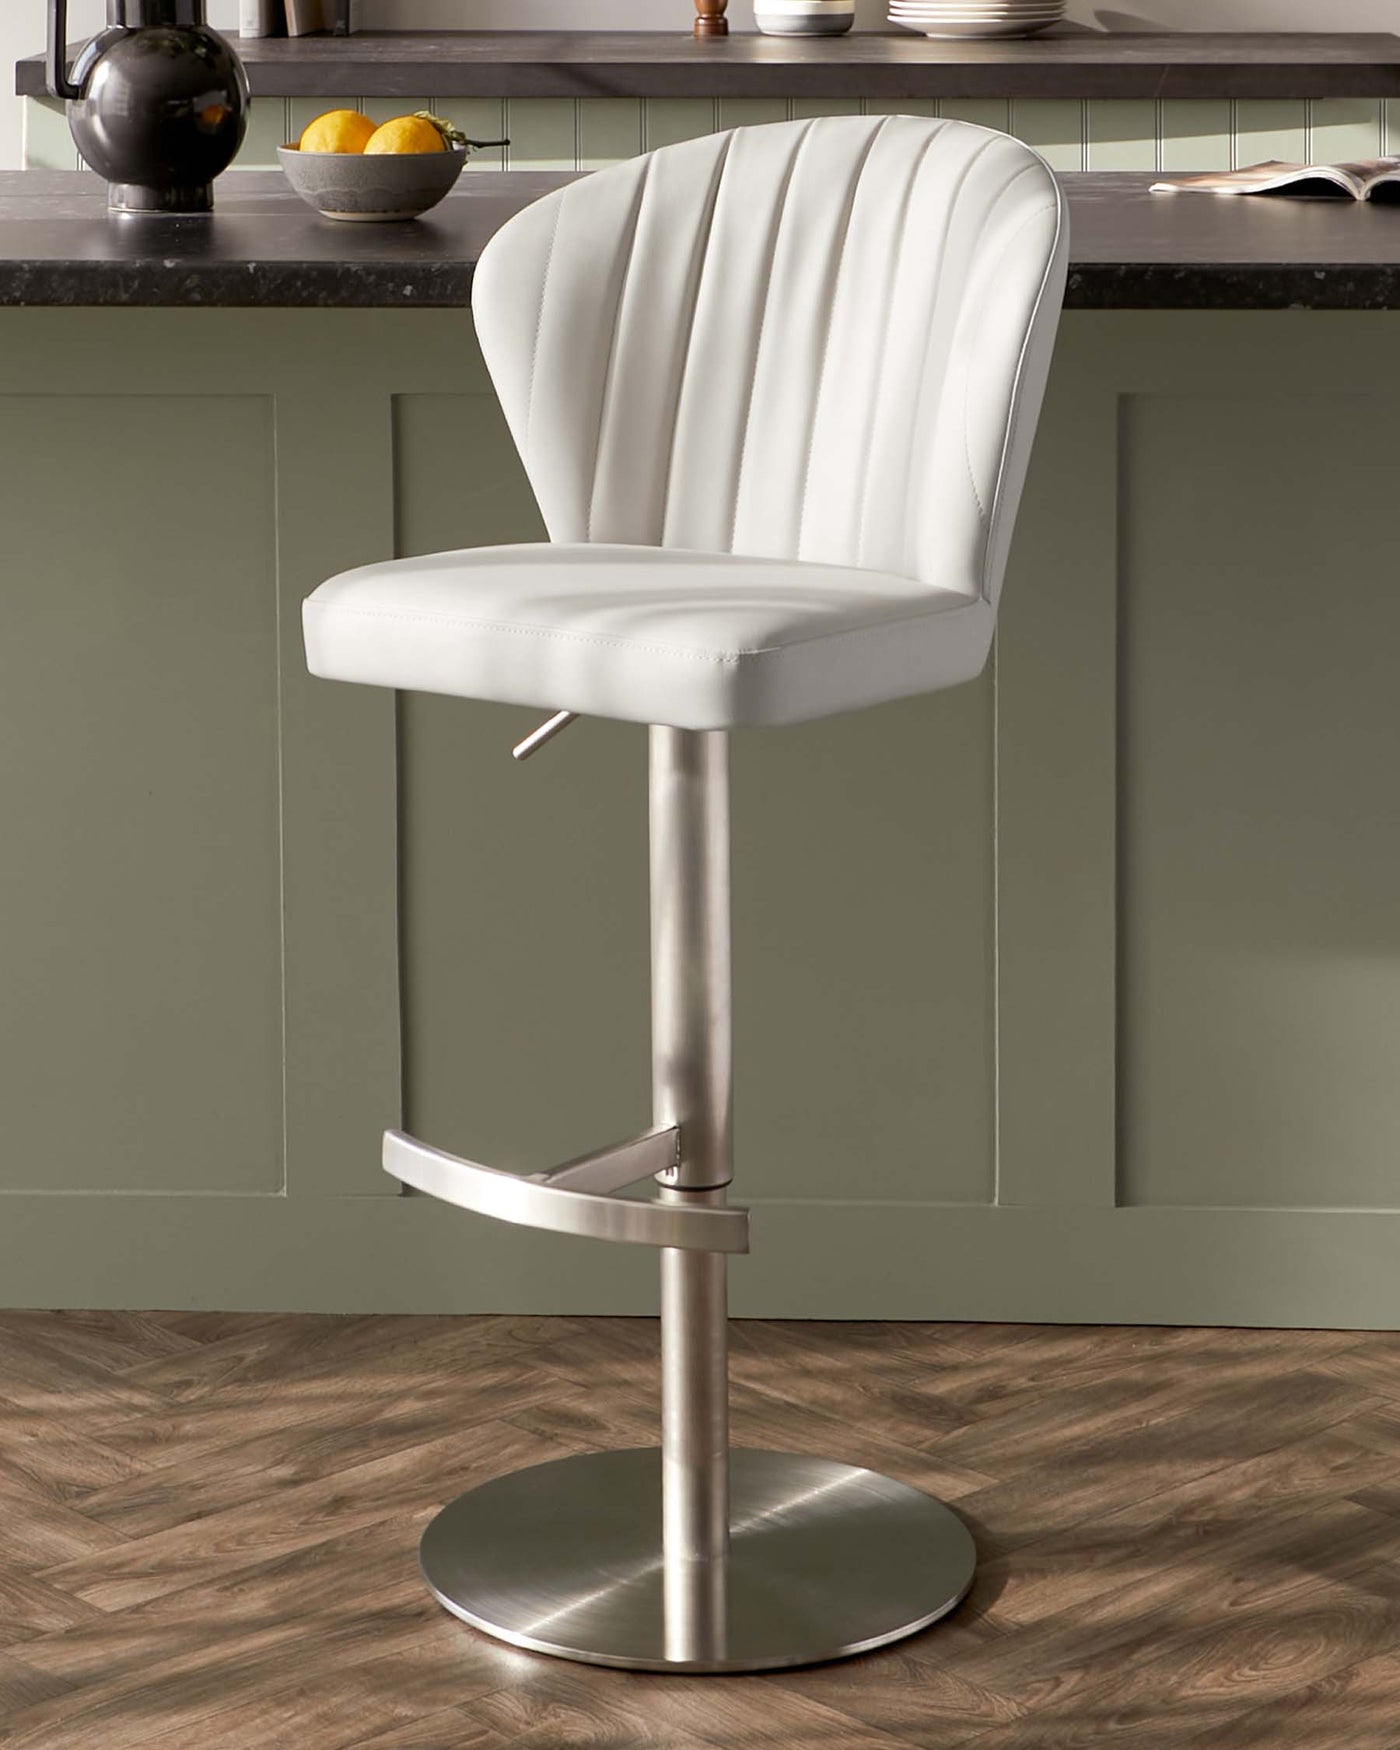 Modern adjustable bar stool with a high back, white faux leather upholstery, vertical stitching detail, supported by a chrome pedestal base with a built-in footrest.